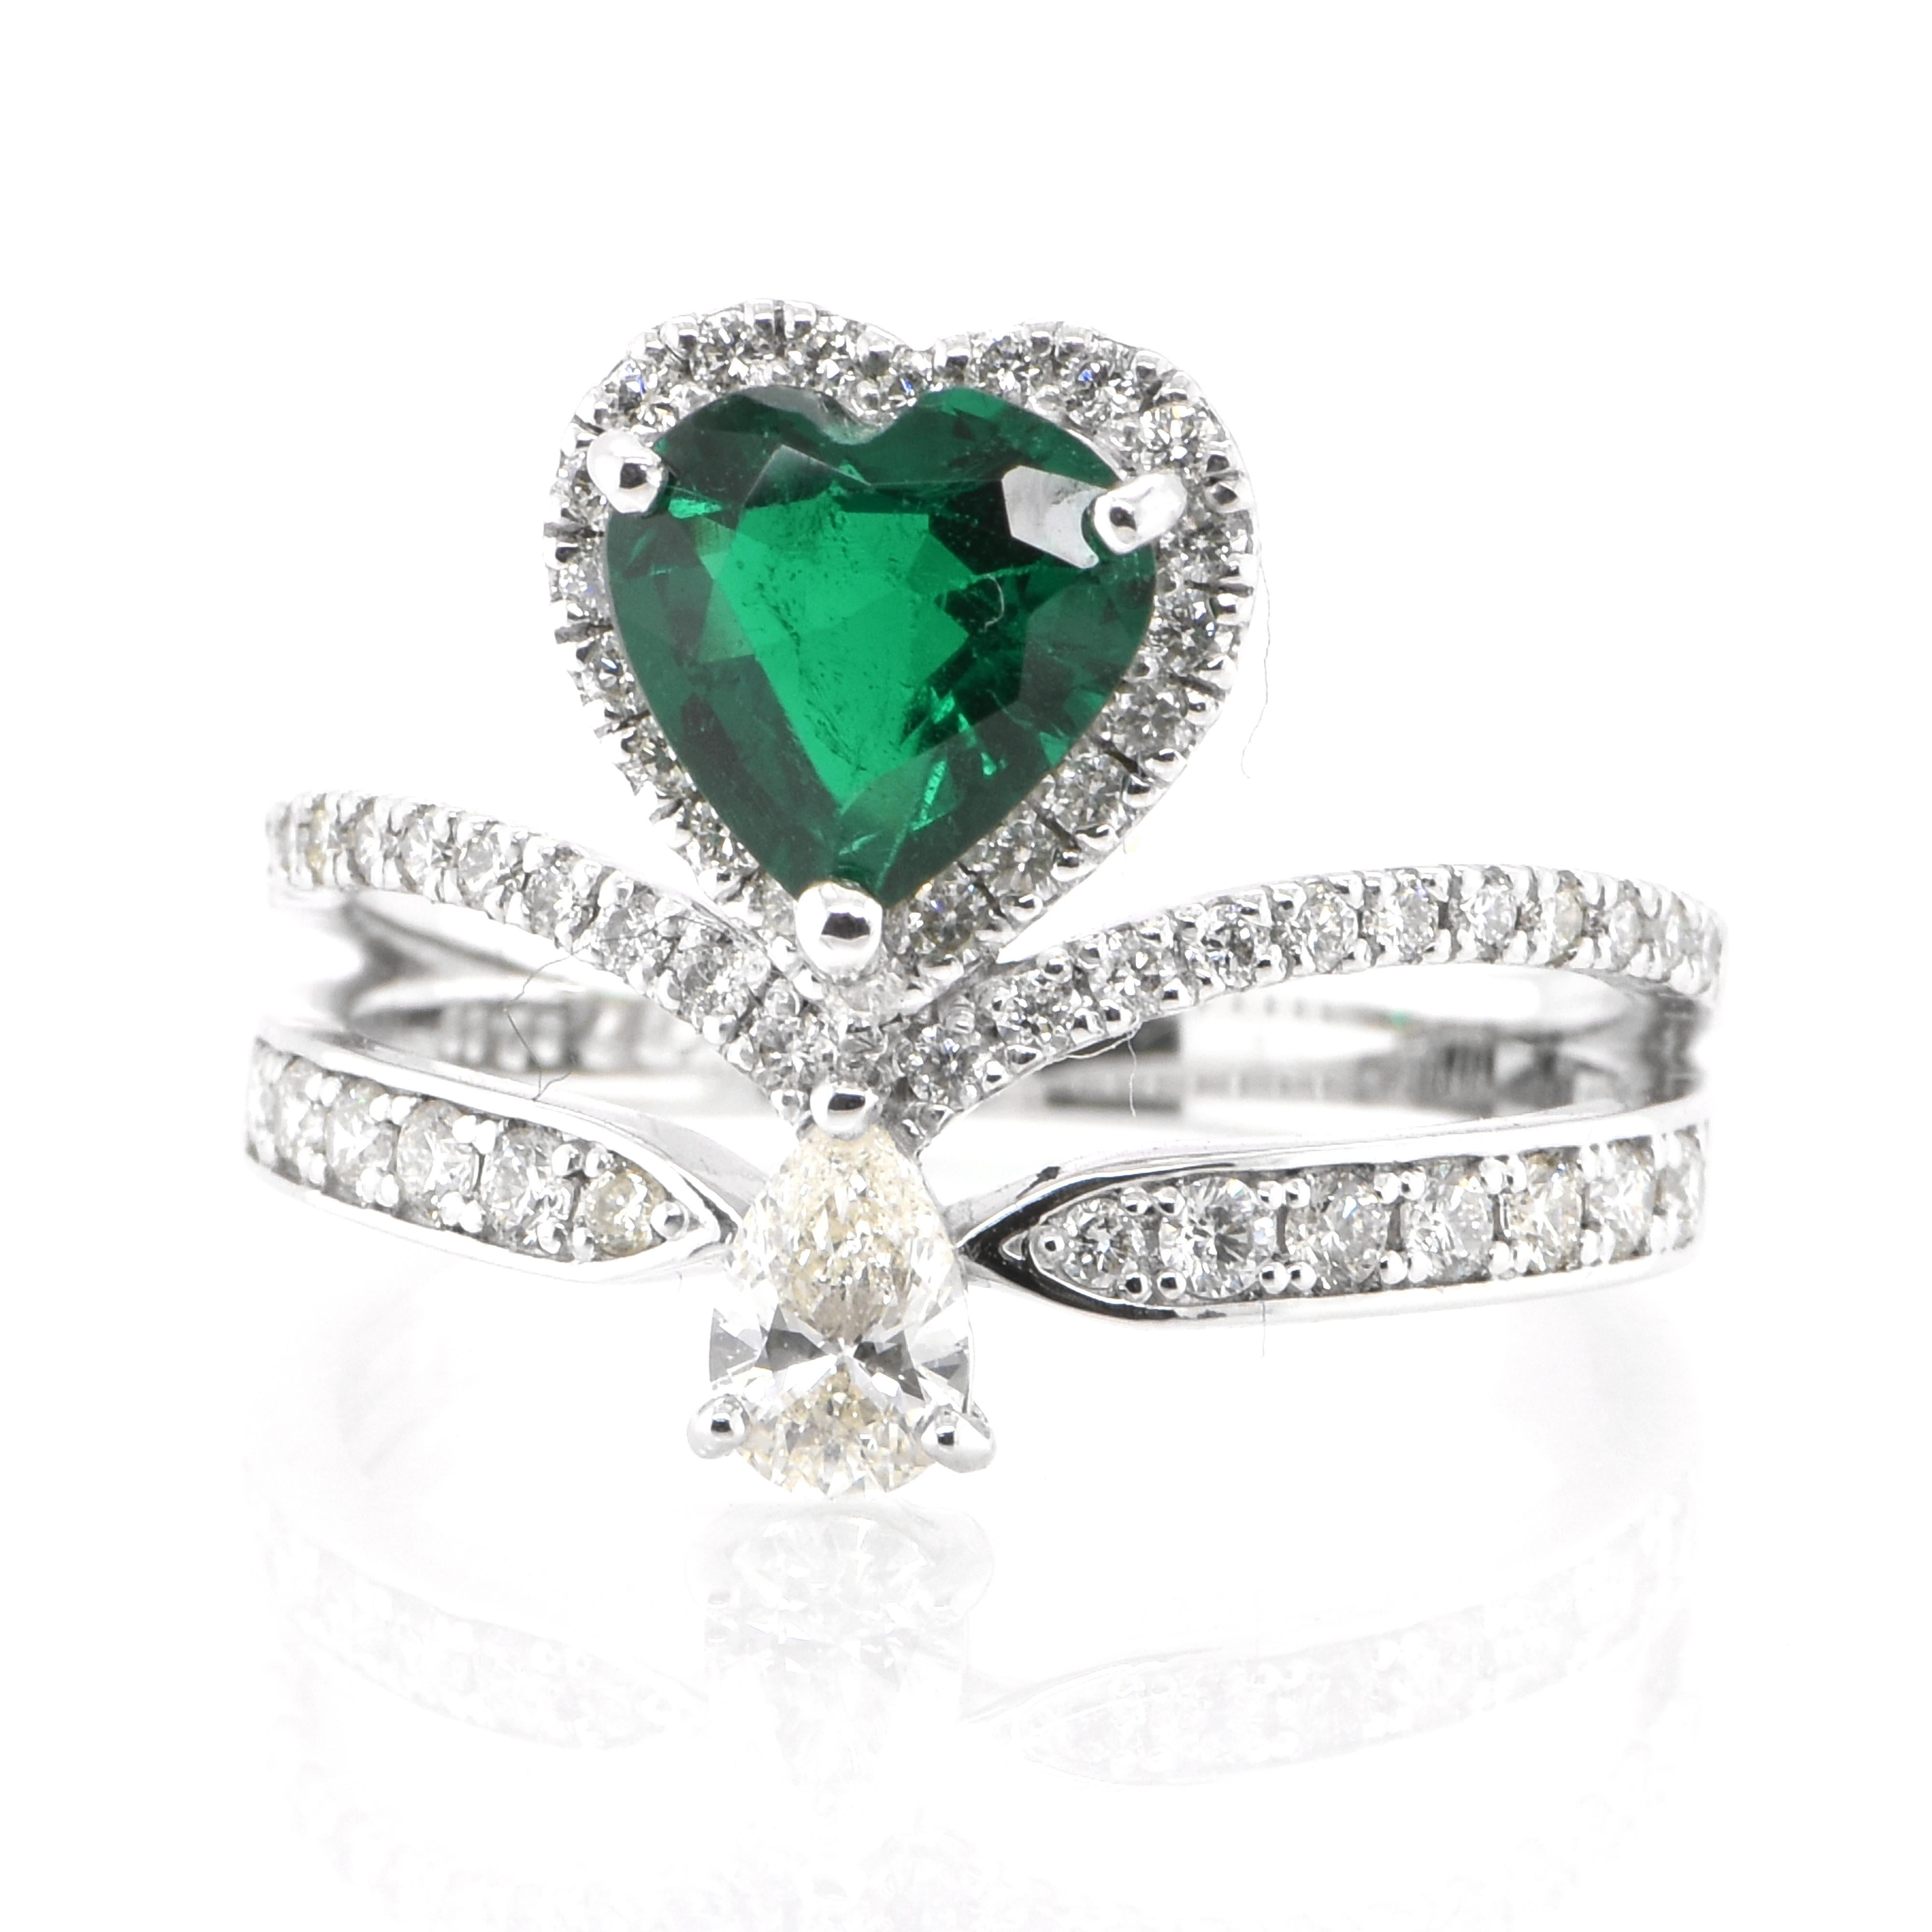 A stunning ring featuring a 1.07 Carat Natural Emerald and 0.68 Carats of Diamond Accents set in Platinum. People have admired emerald’s green for thousands of years. Emeralds have always been associated with the lushest landscapes and the richest